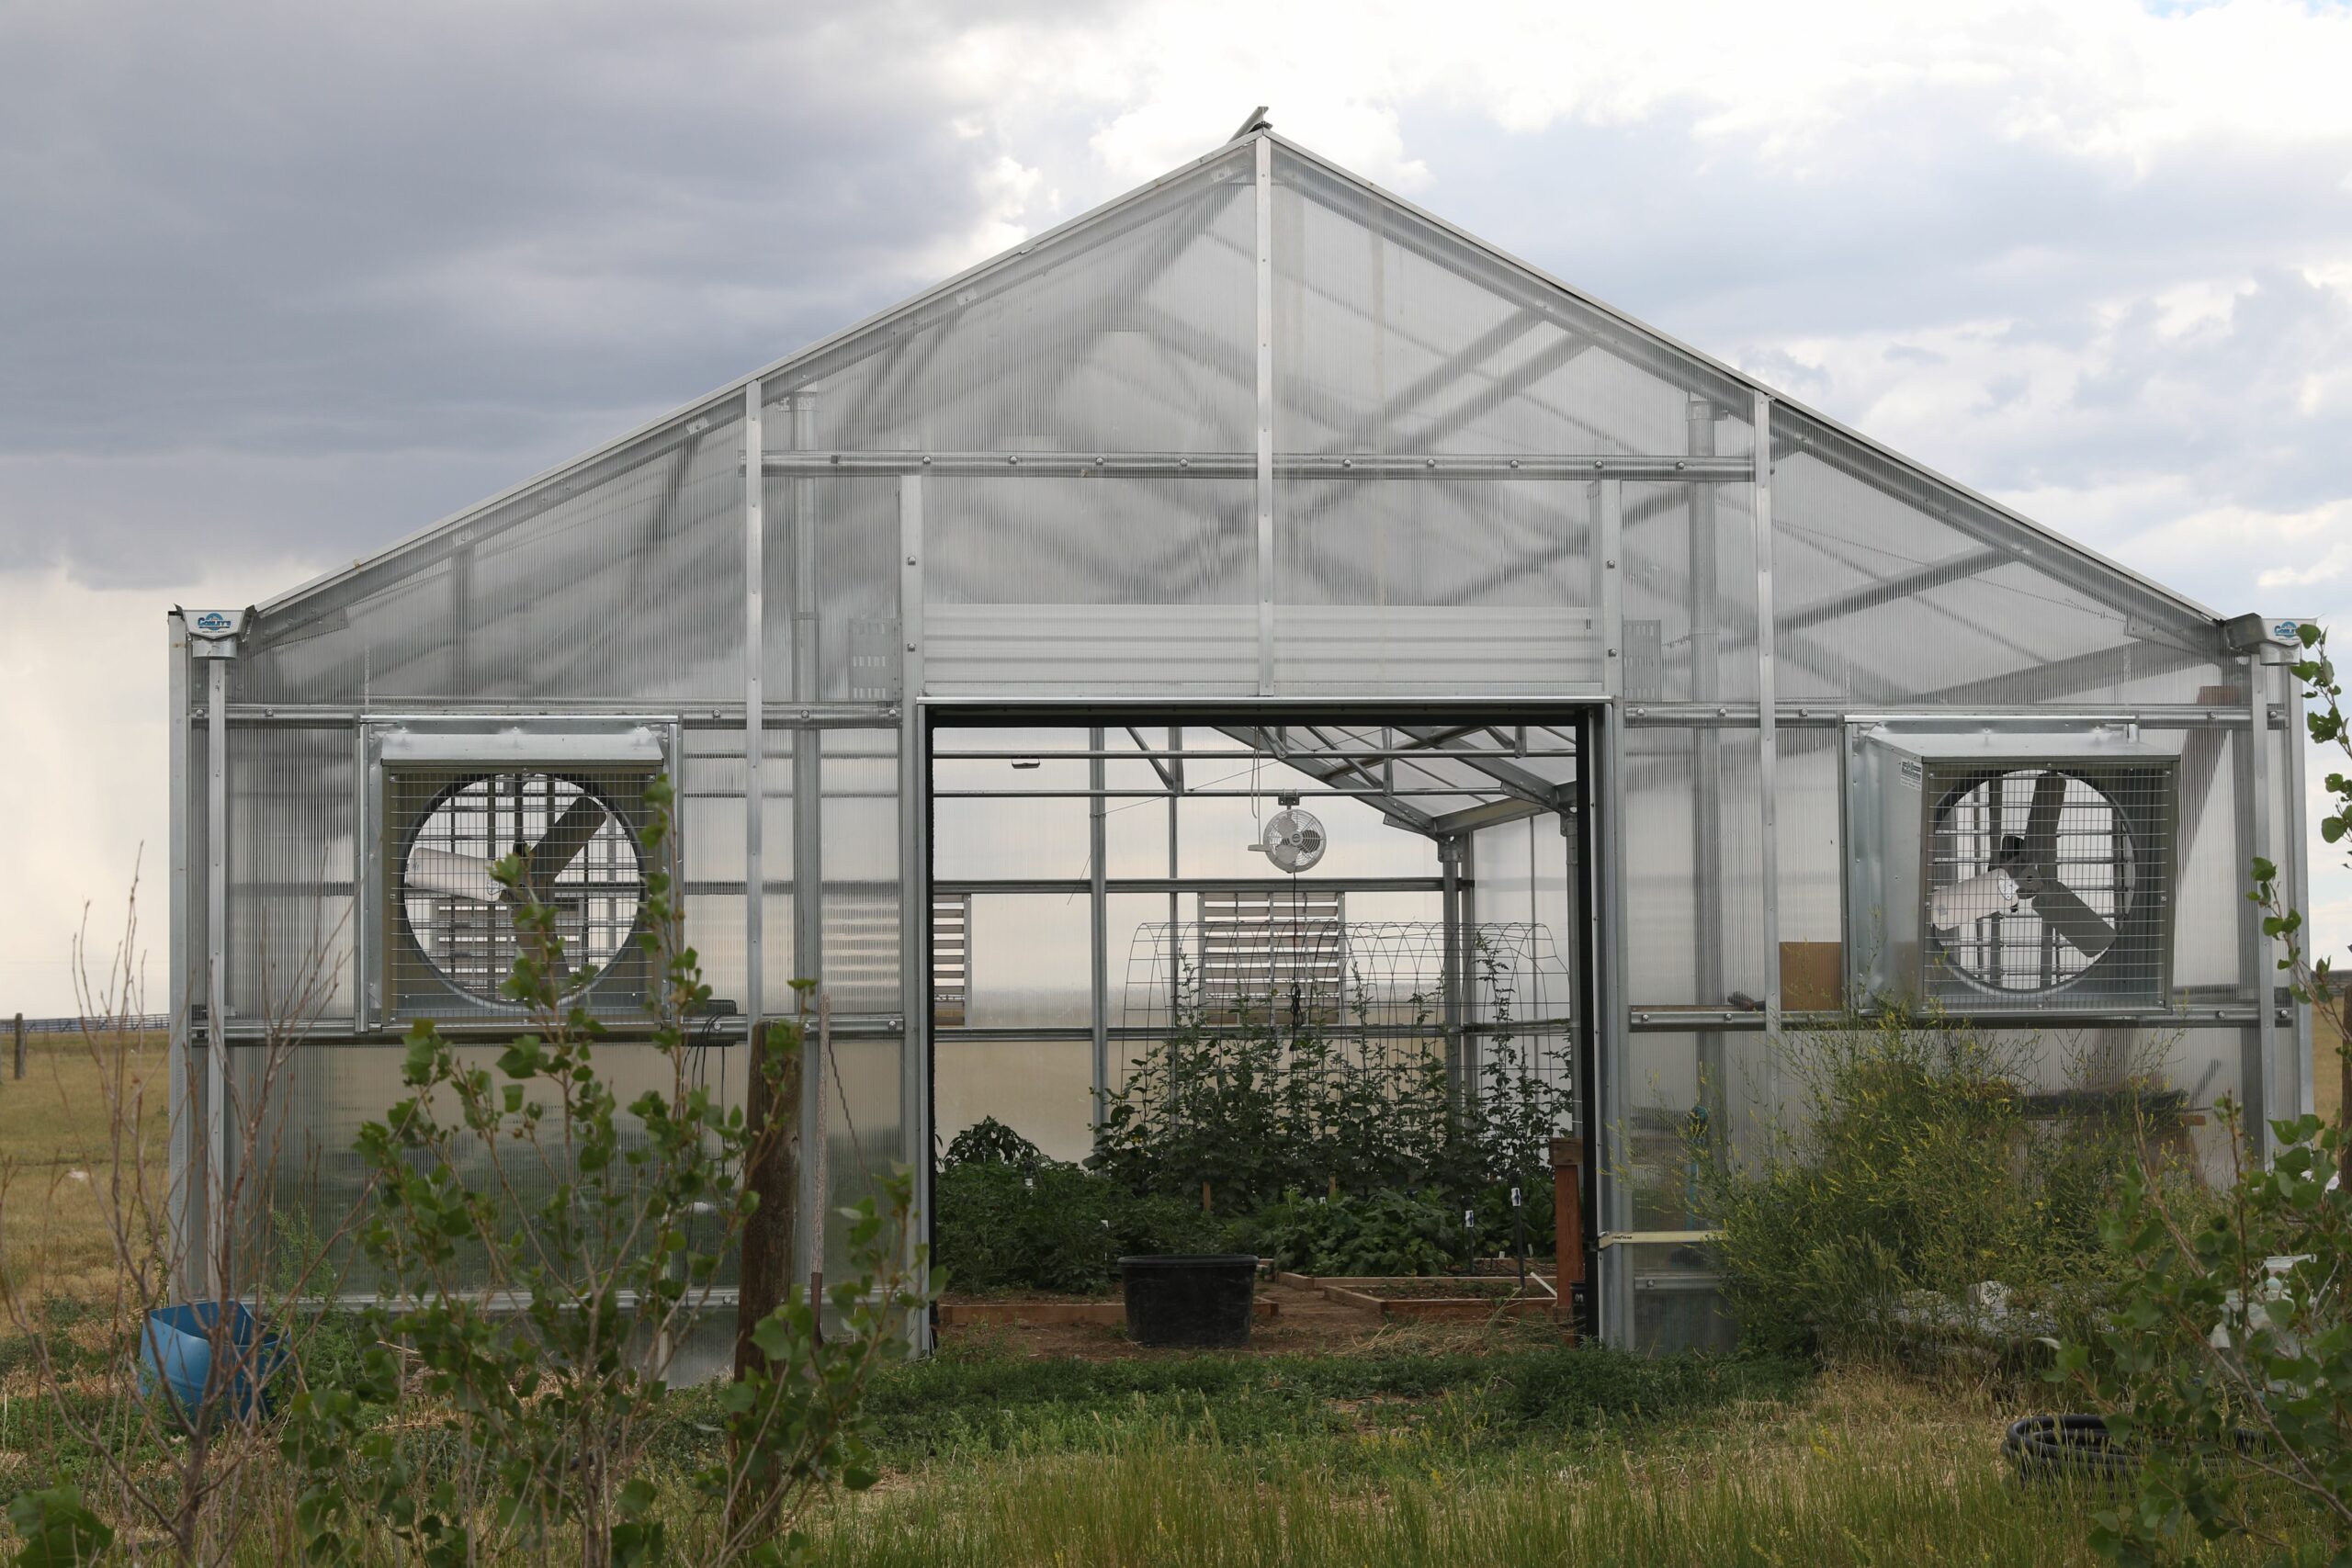 How to Choose the Right Shade Cloth for your Greenhouse (and why